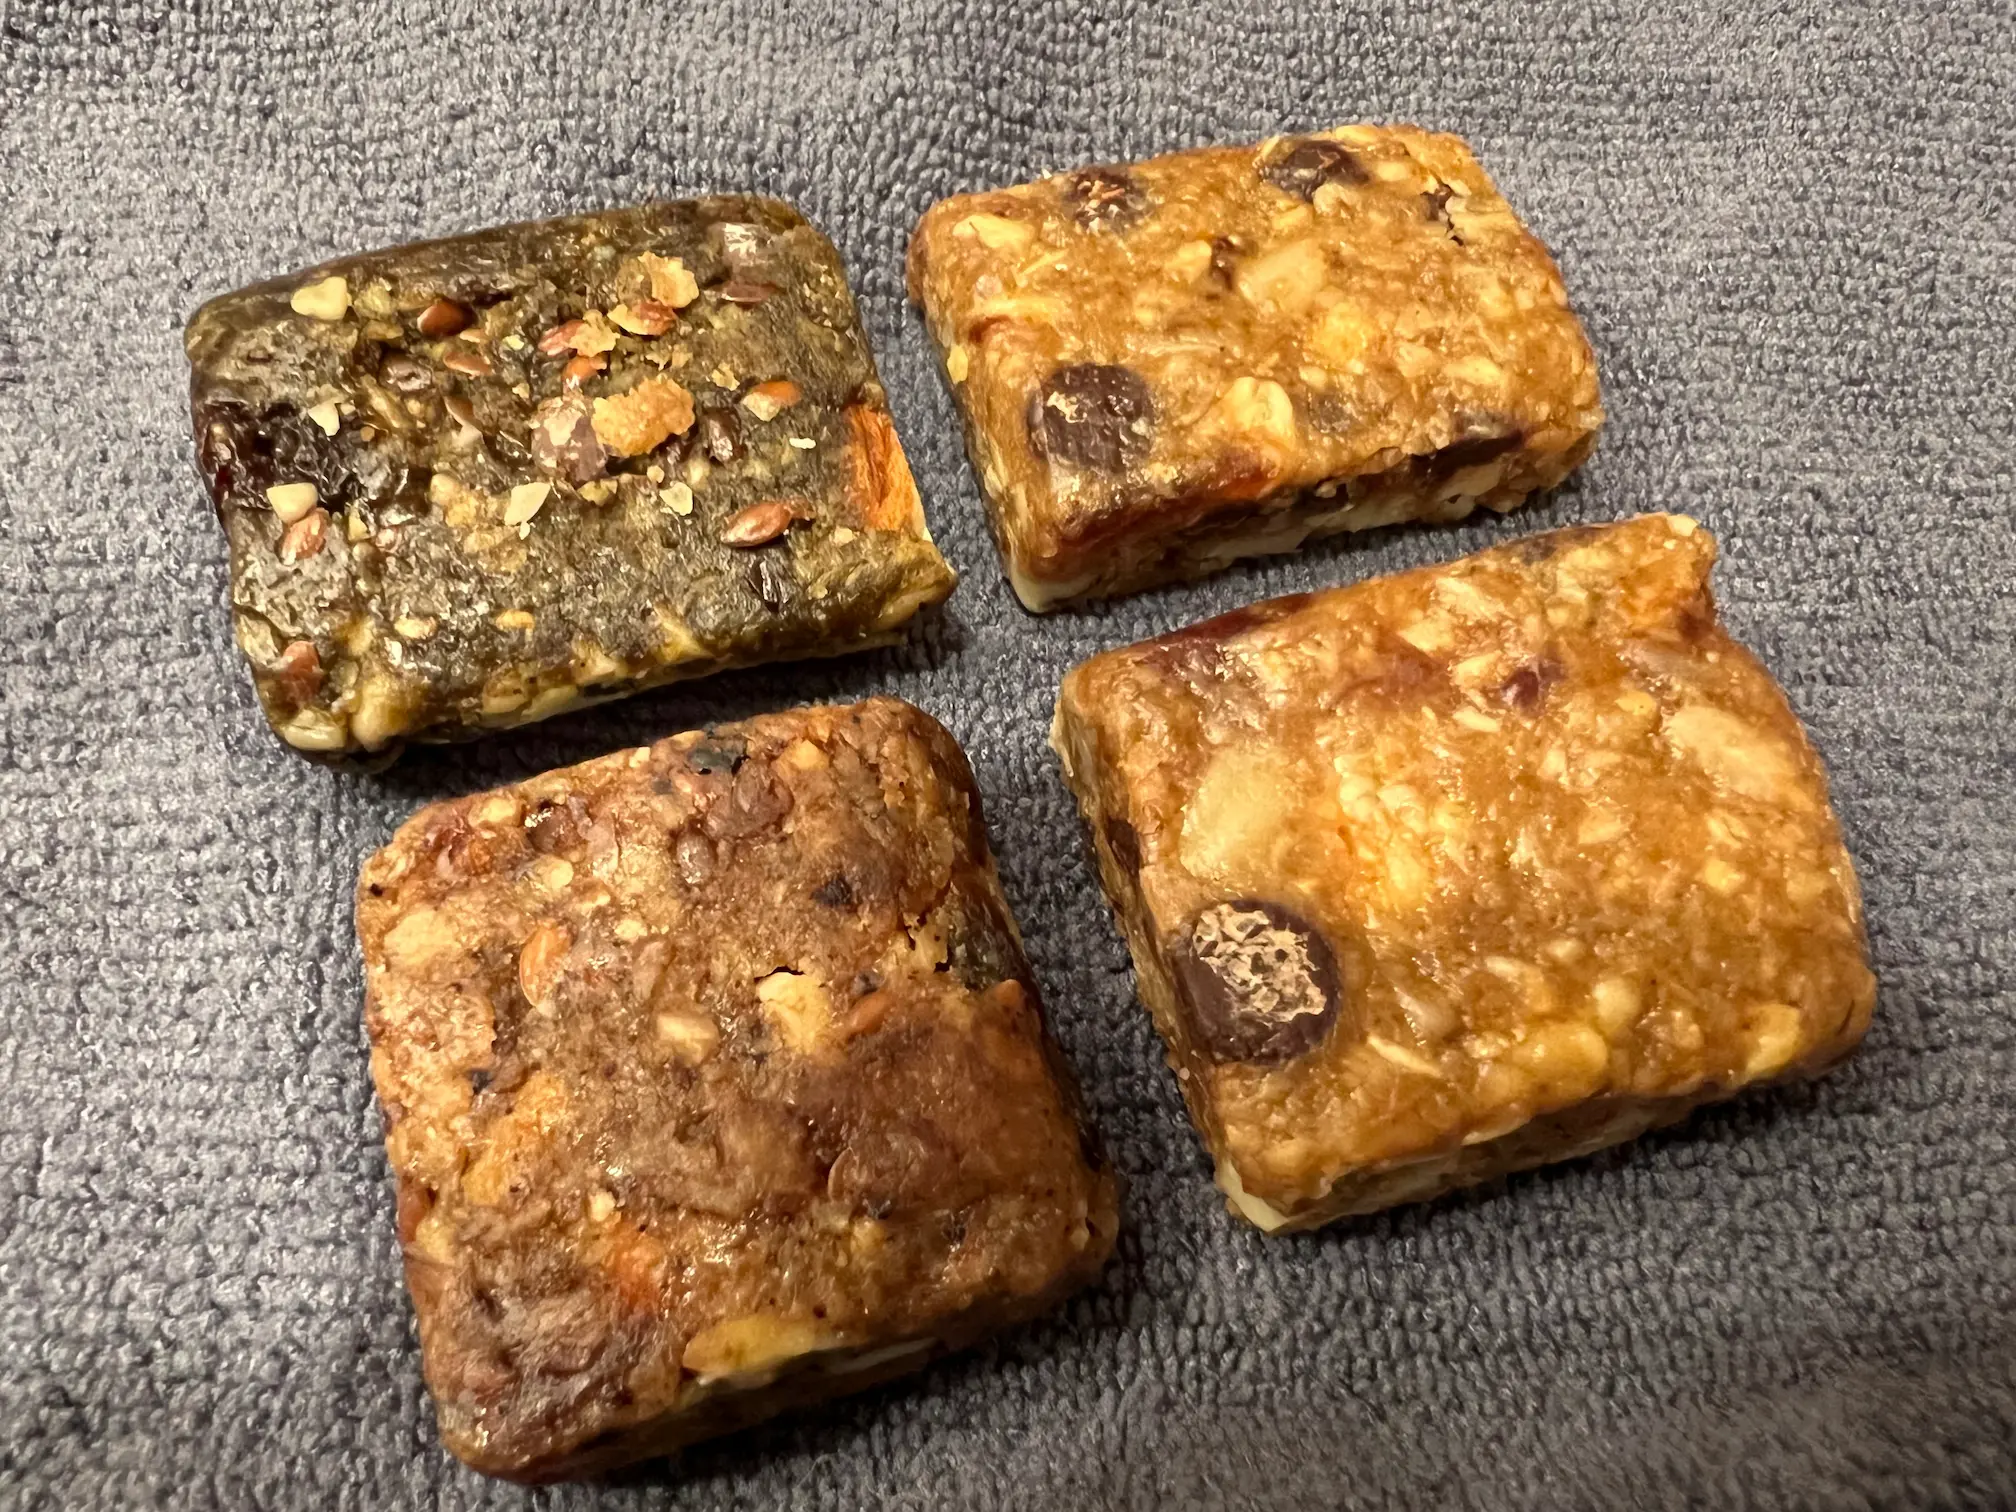 Four perfectly-portioned 100-calorie snack bites from a single PROBAR Meal Bar.